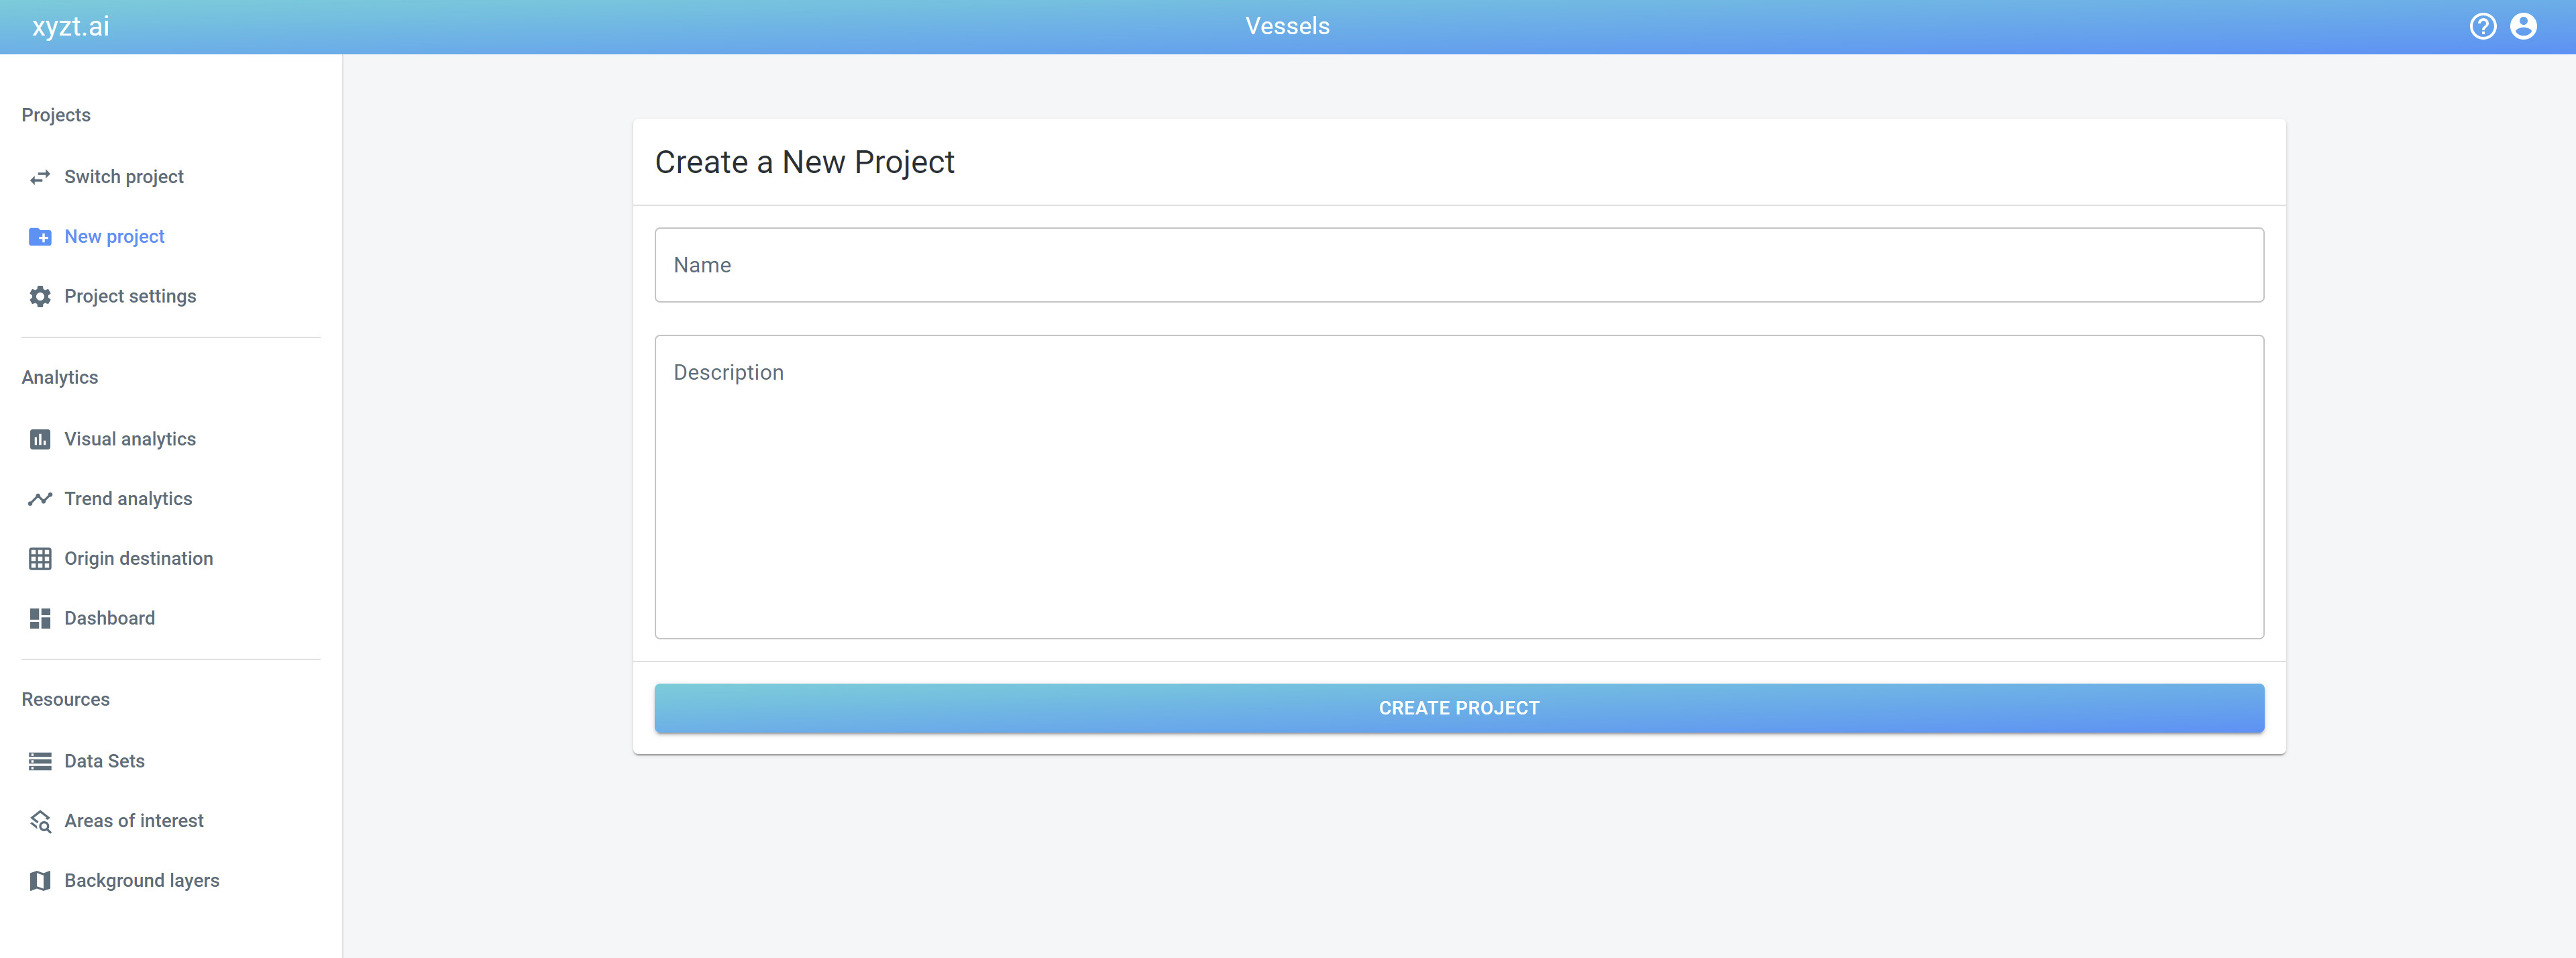 screenshot of the form the create a new project